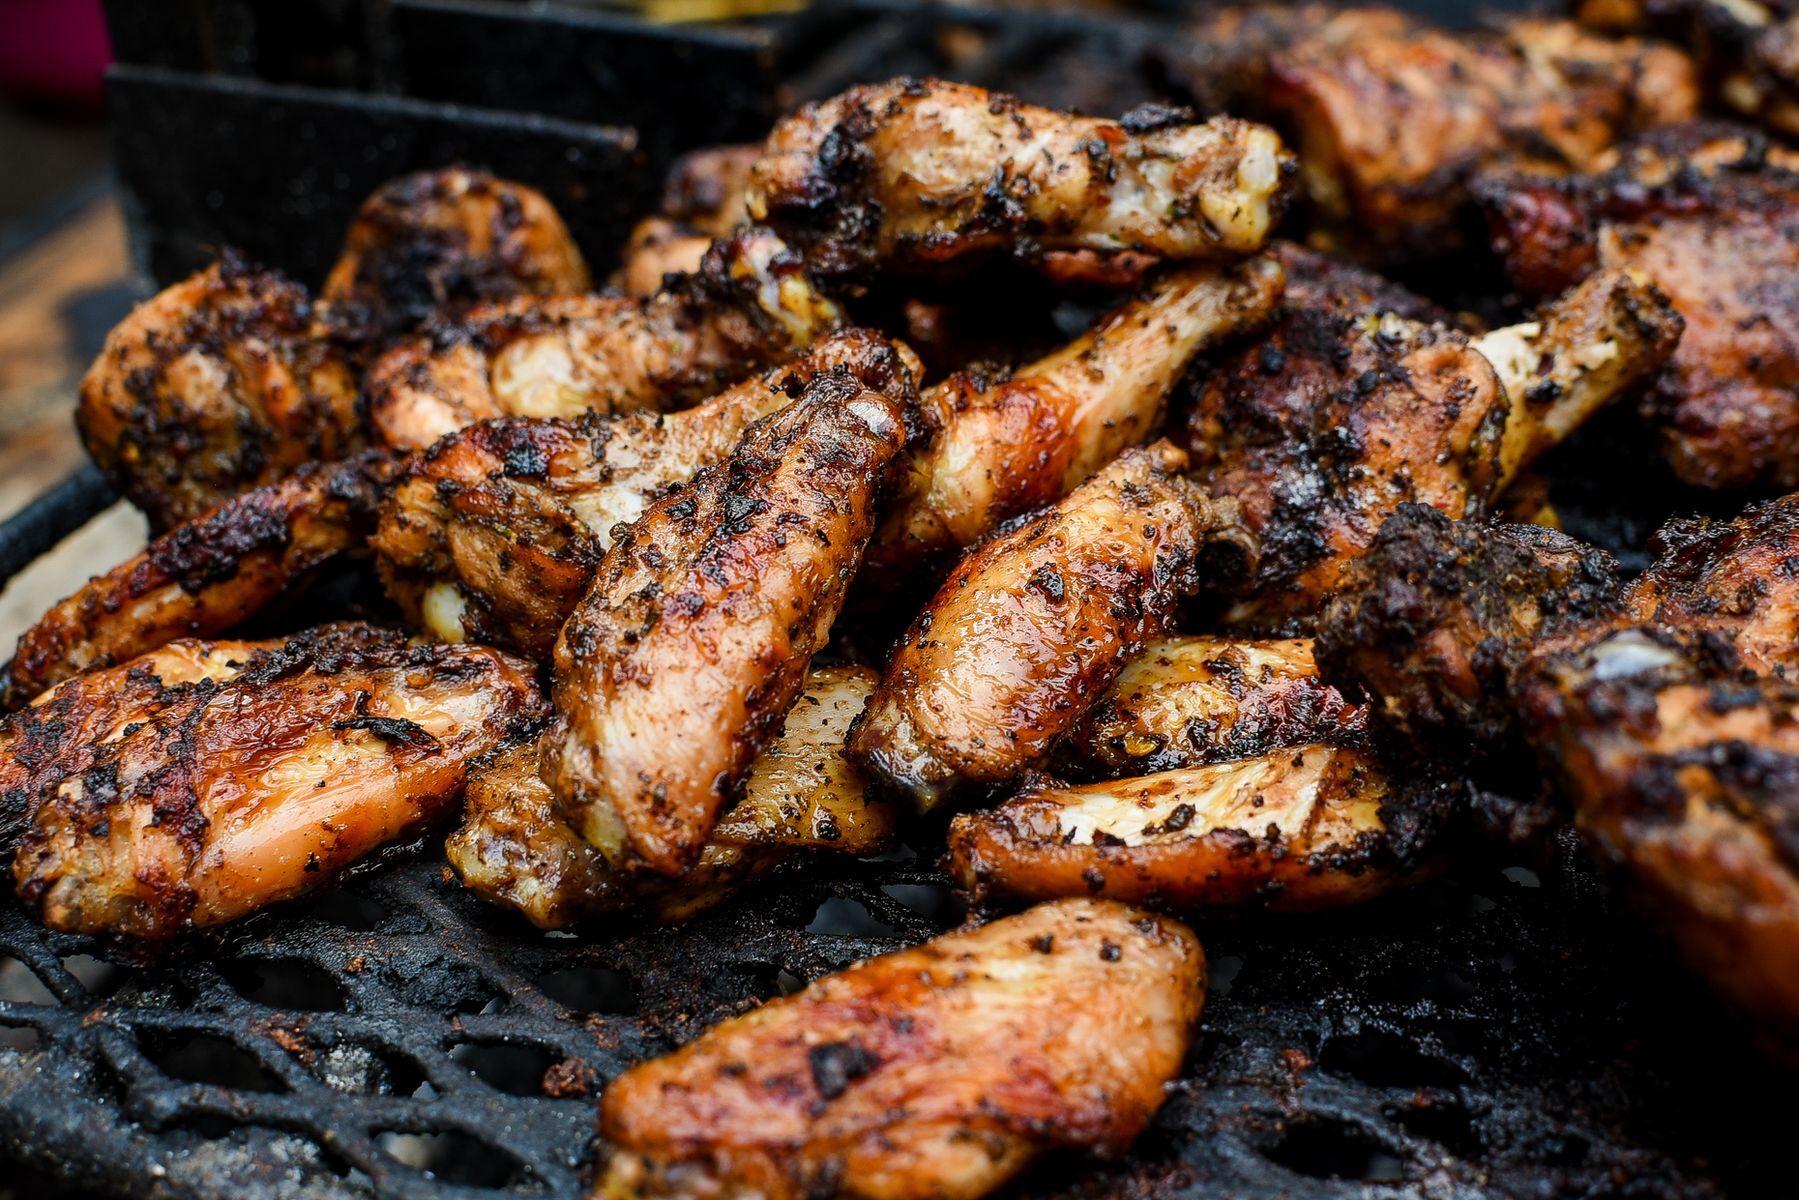 <p>The aroma of jerk chicken, emanating from both homes and small businesses, permeates every street corner in Jamaica. The recipe calls for a <a href="https://foodsguy.com/is-jerk-chicken-spicy/" rel="noreferrer noopener">wet or dry marinade made from various spices and hot peppers</a>. Crispy on the outside, juicy on the inside, the result is simply delightful!</p>